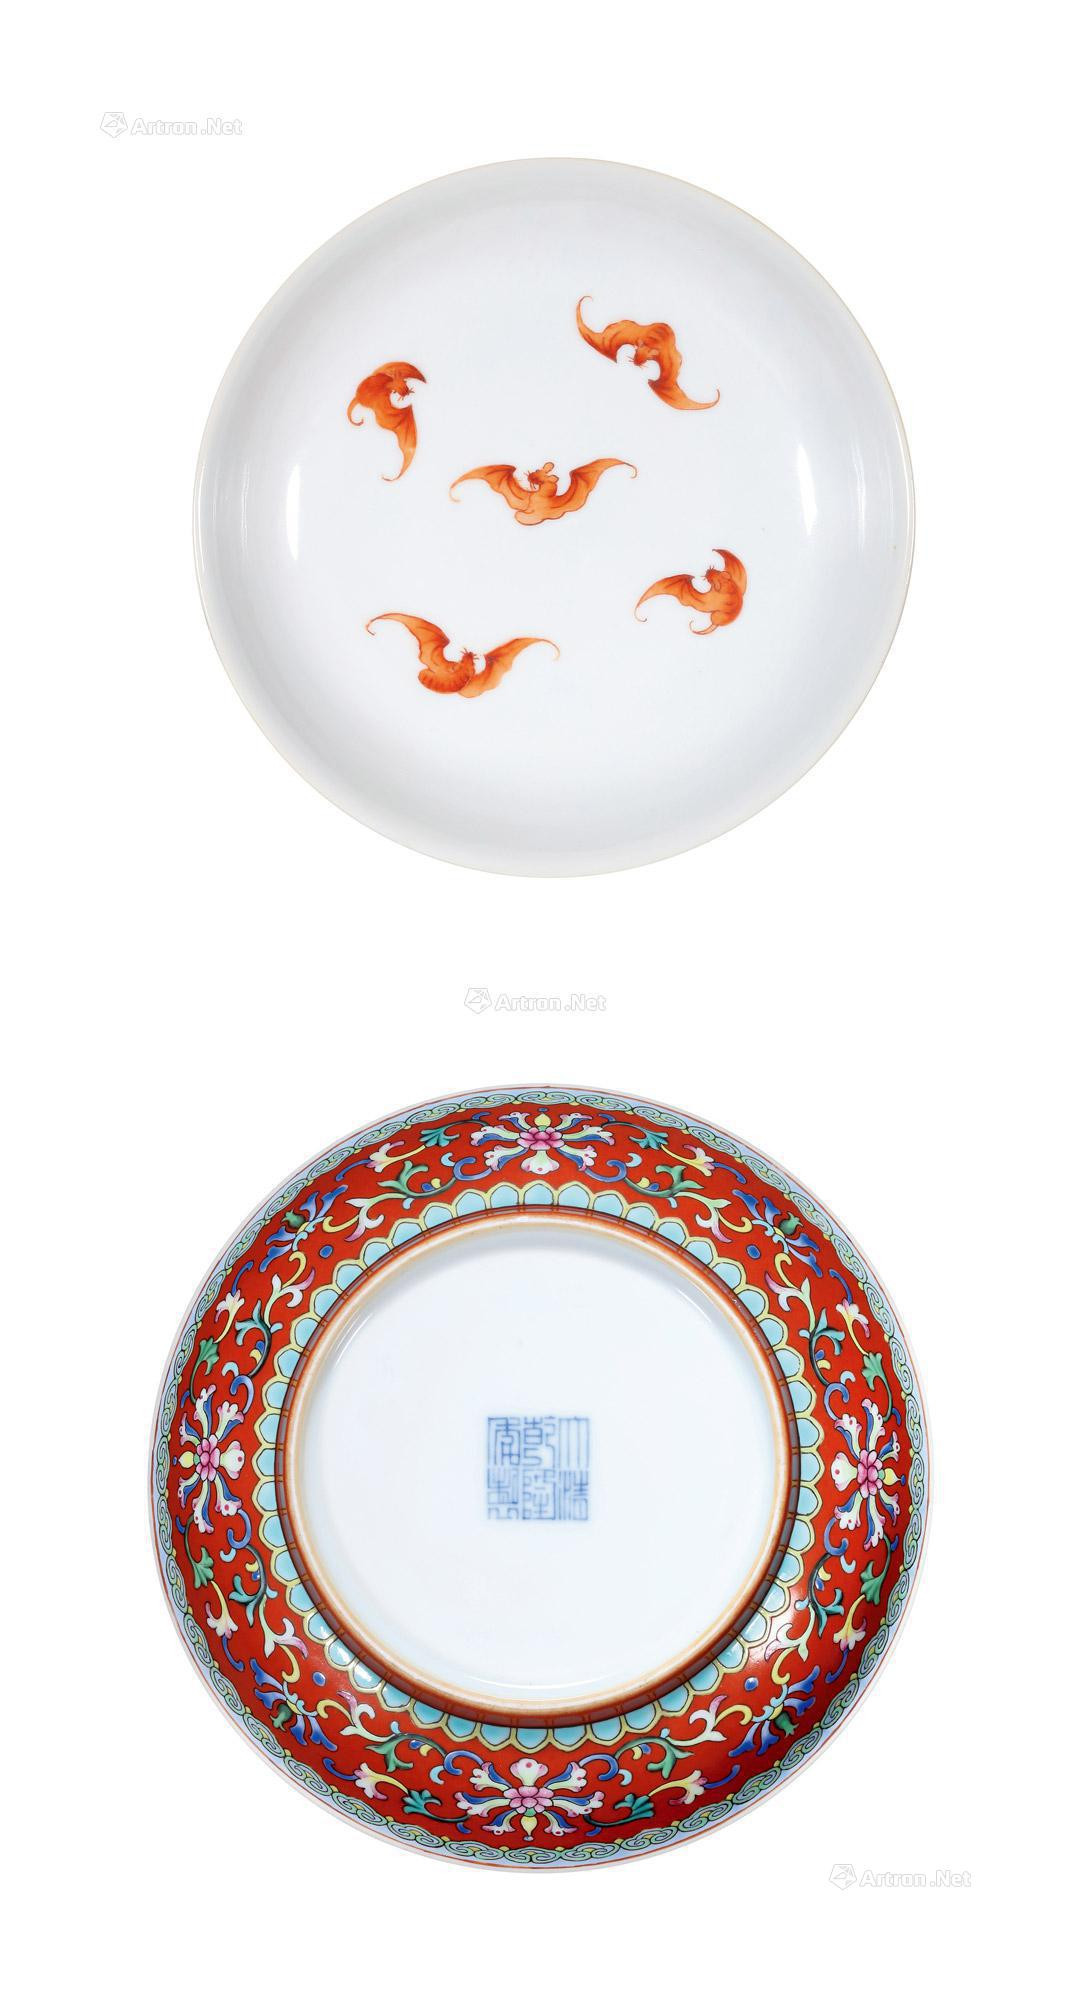 A YANG CAI PLATE WITH BATS AND FLOWERS DESIGN